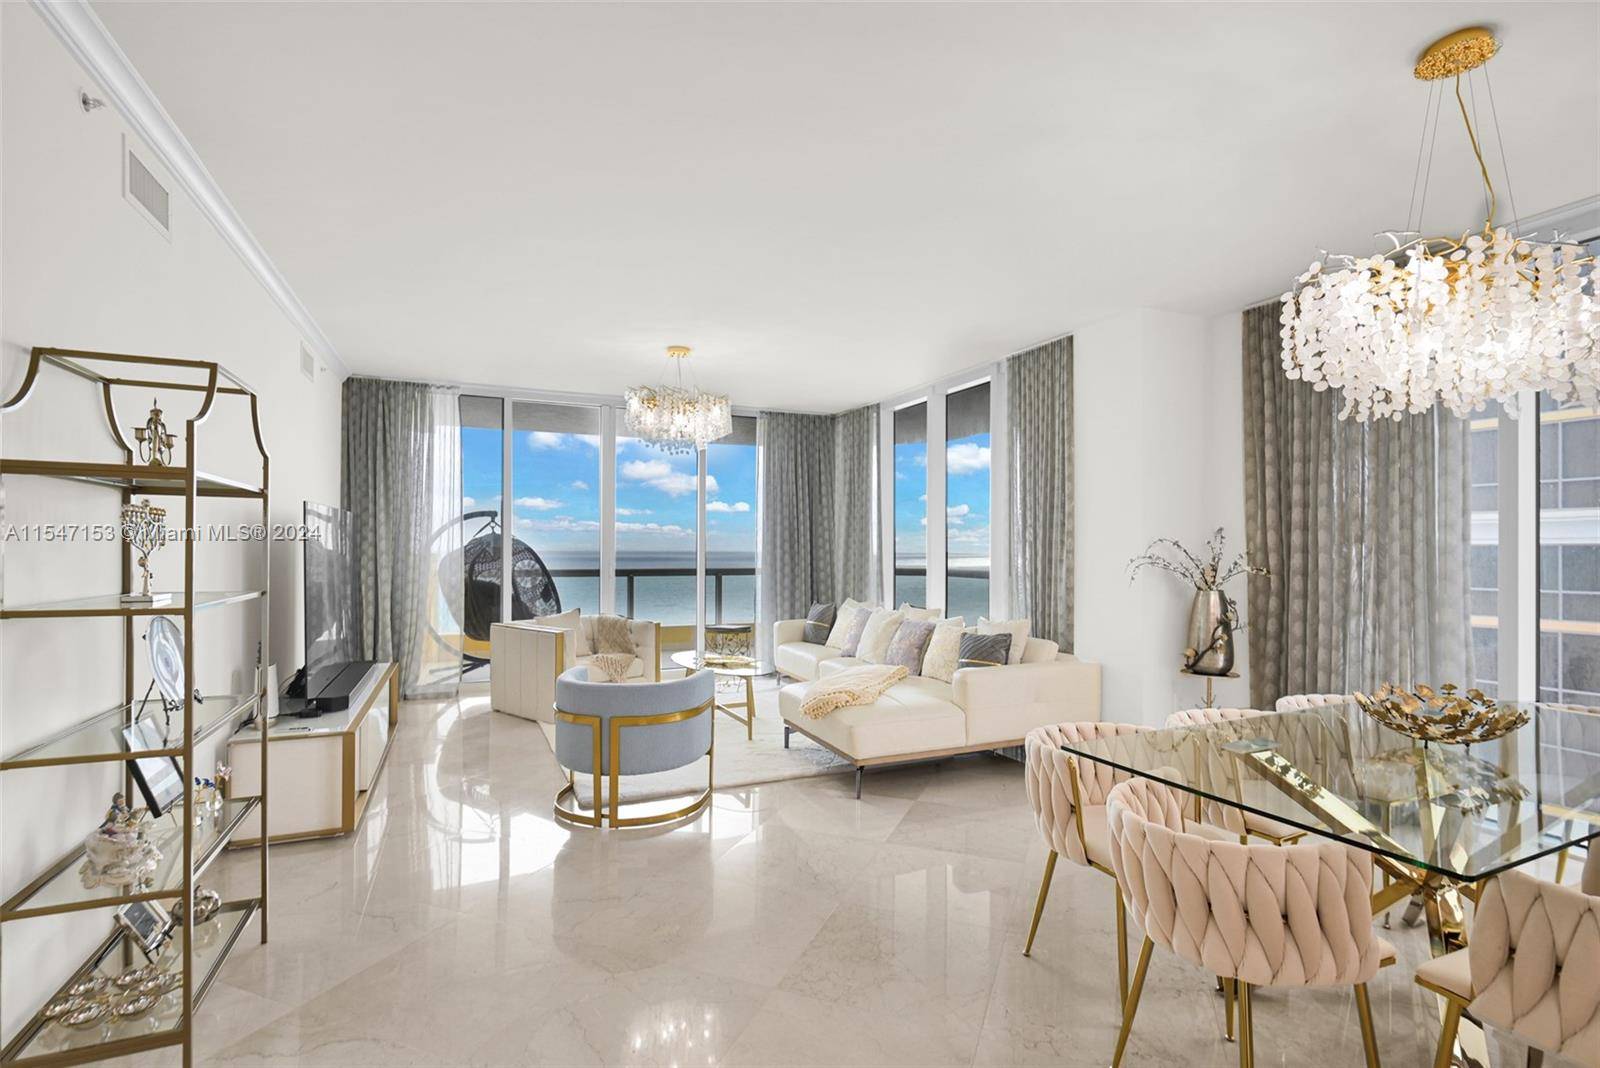 Welcome home to this magnificent luxury residence at Acqualina residences in Sunny Isles.